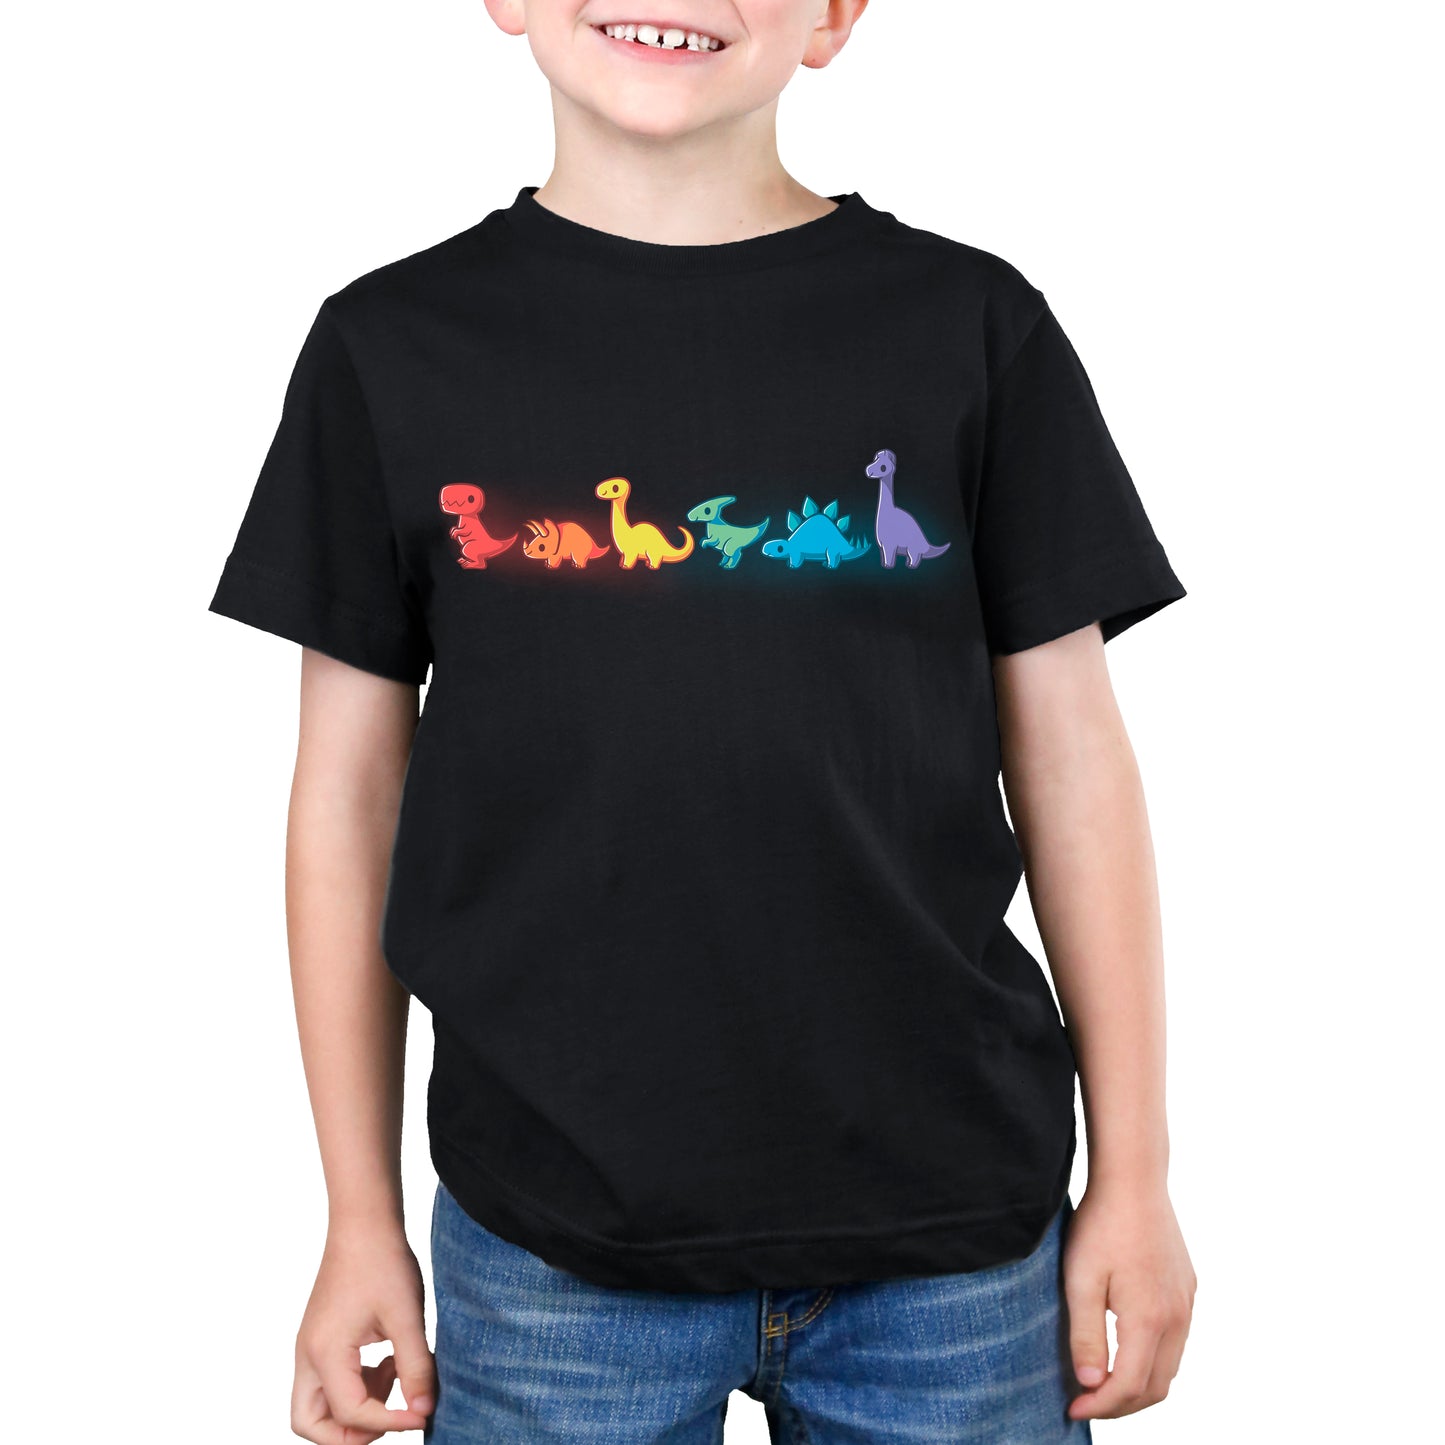 A young boy wearing a Dino-mite black t-shirt with TeeTurtle Rainbow Dinos.